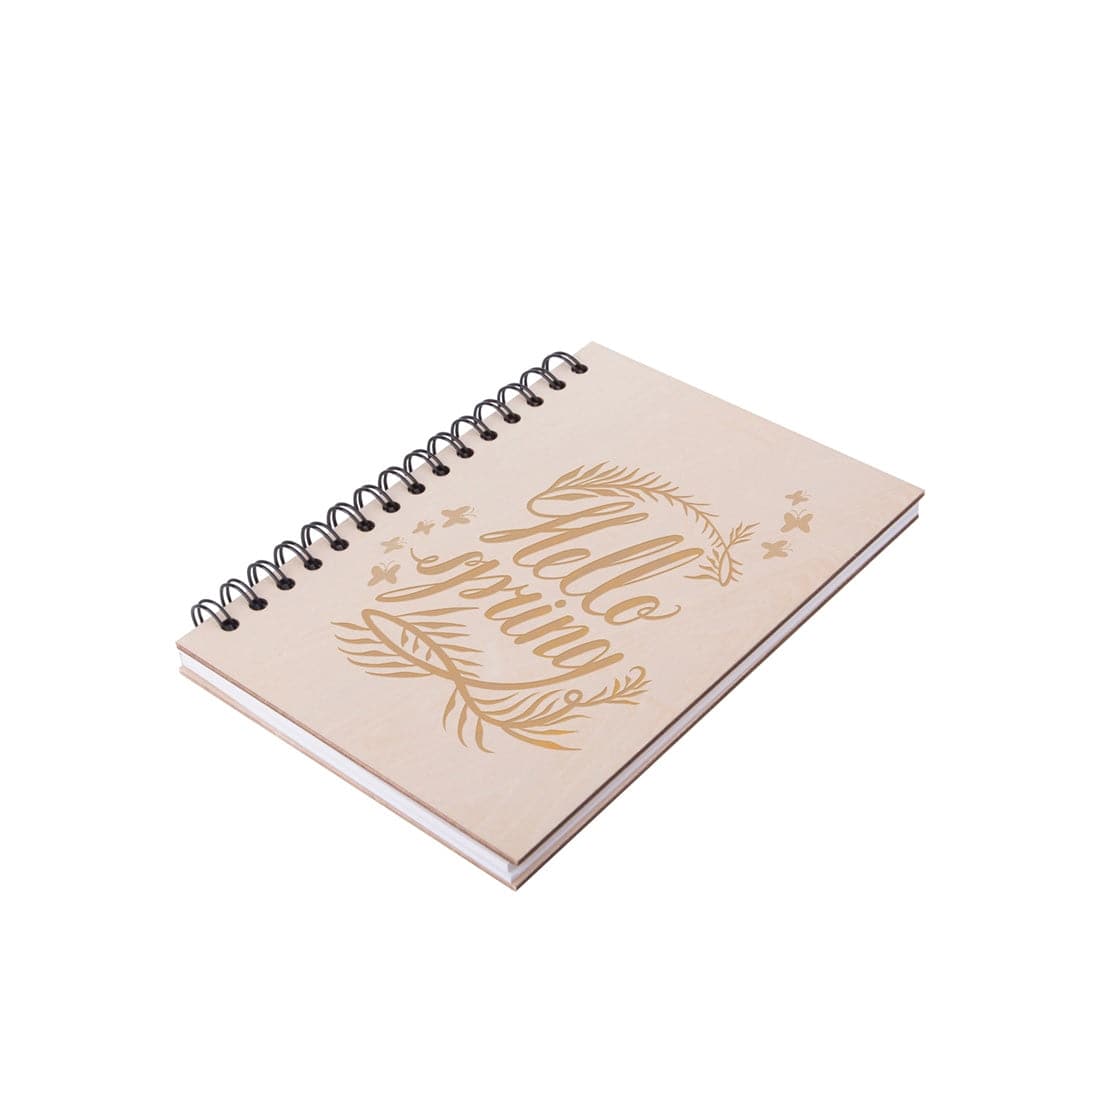 Engravable Wiro Plywood Cover Notebook A5 - Pack of 6 - Joto Imaging Supplies US